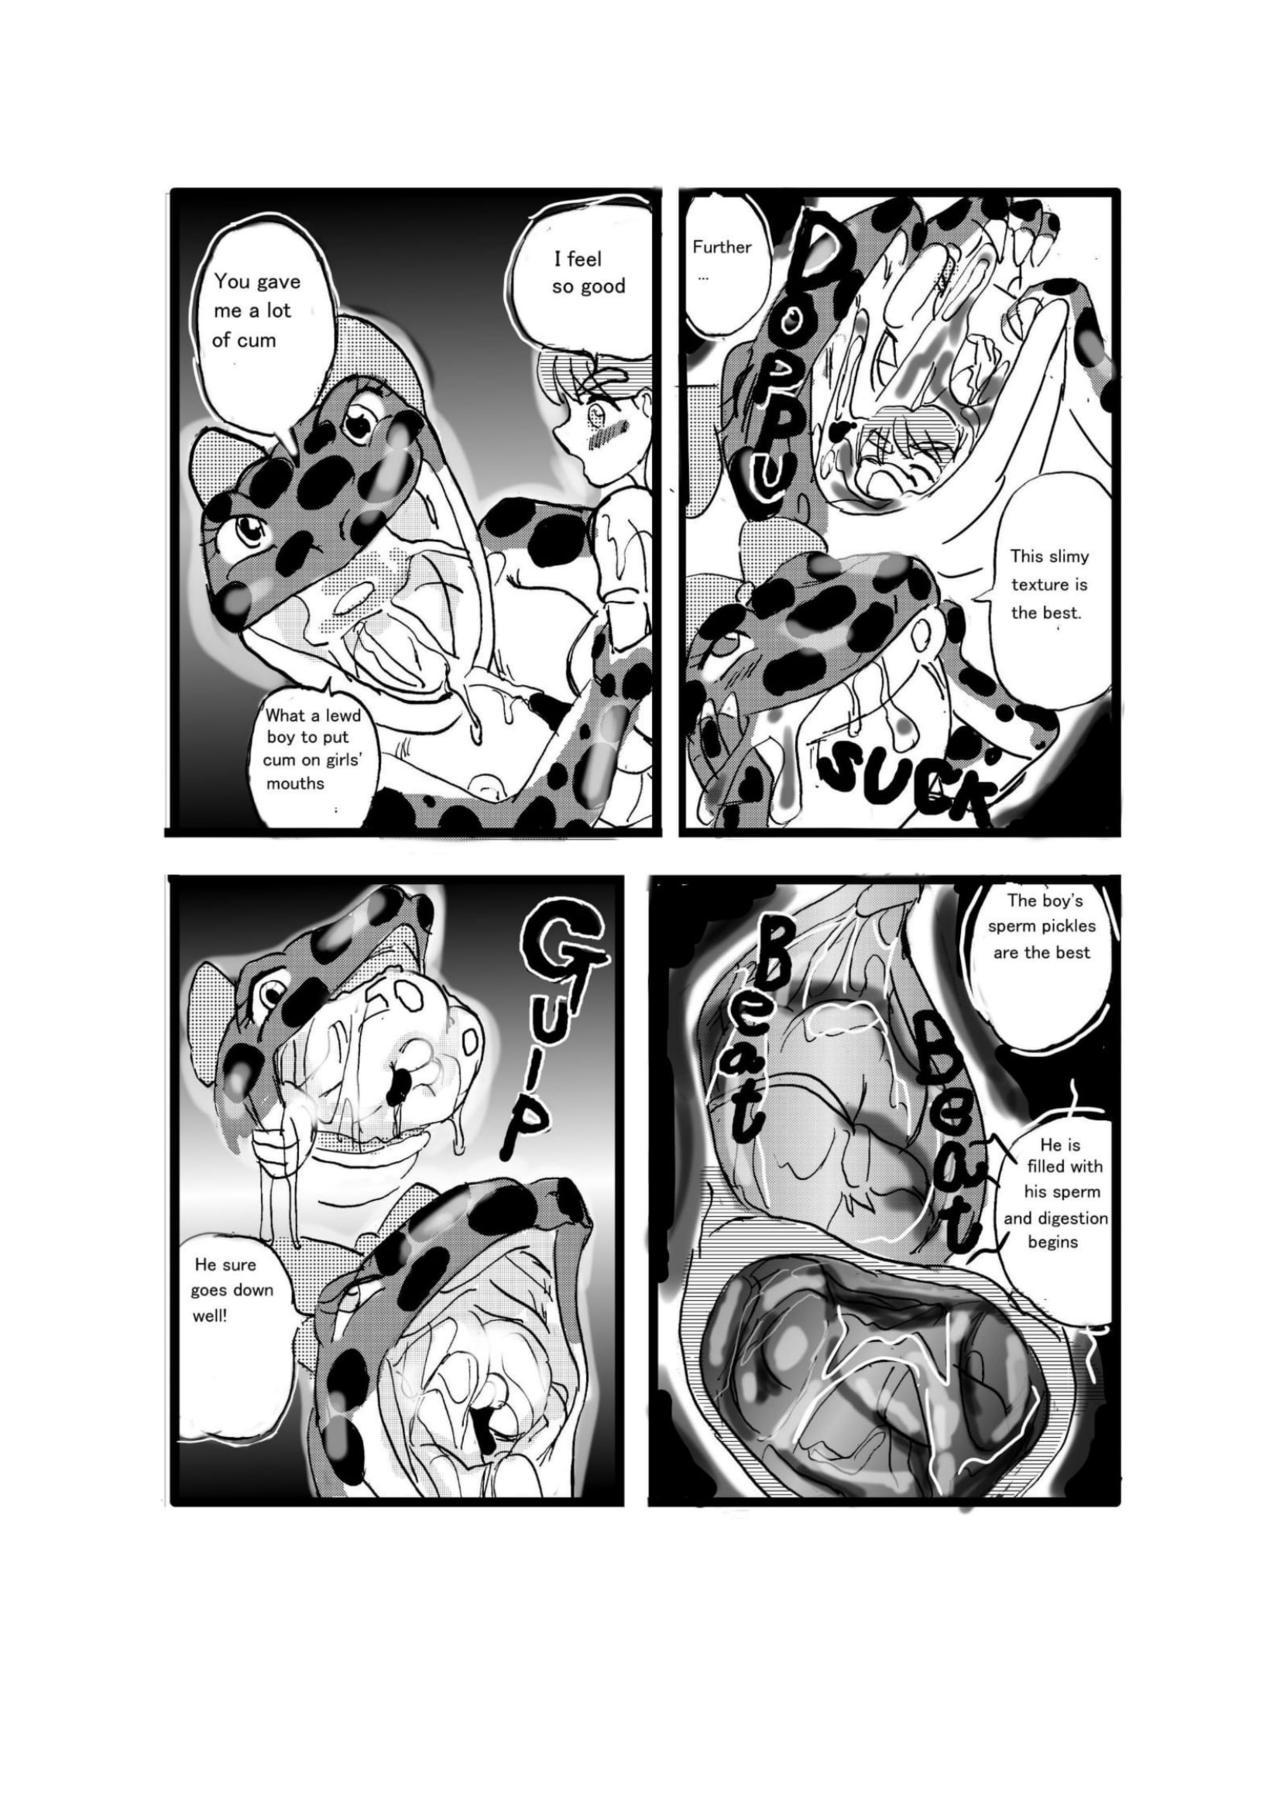 Sucks Swallowed Whole vol.2 Waniko + What's Digestion? - Original Point Of View - Page 8